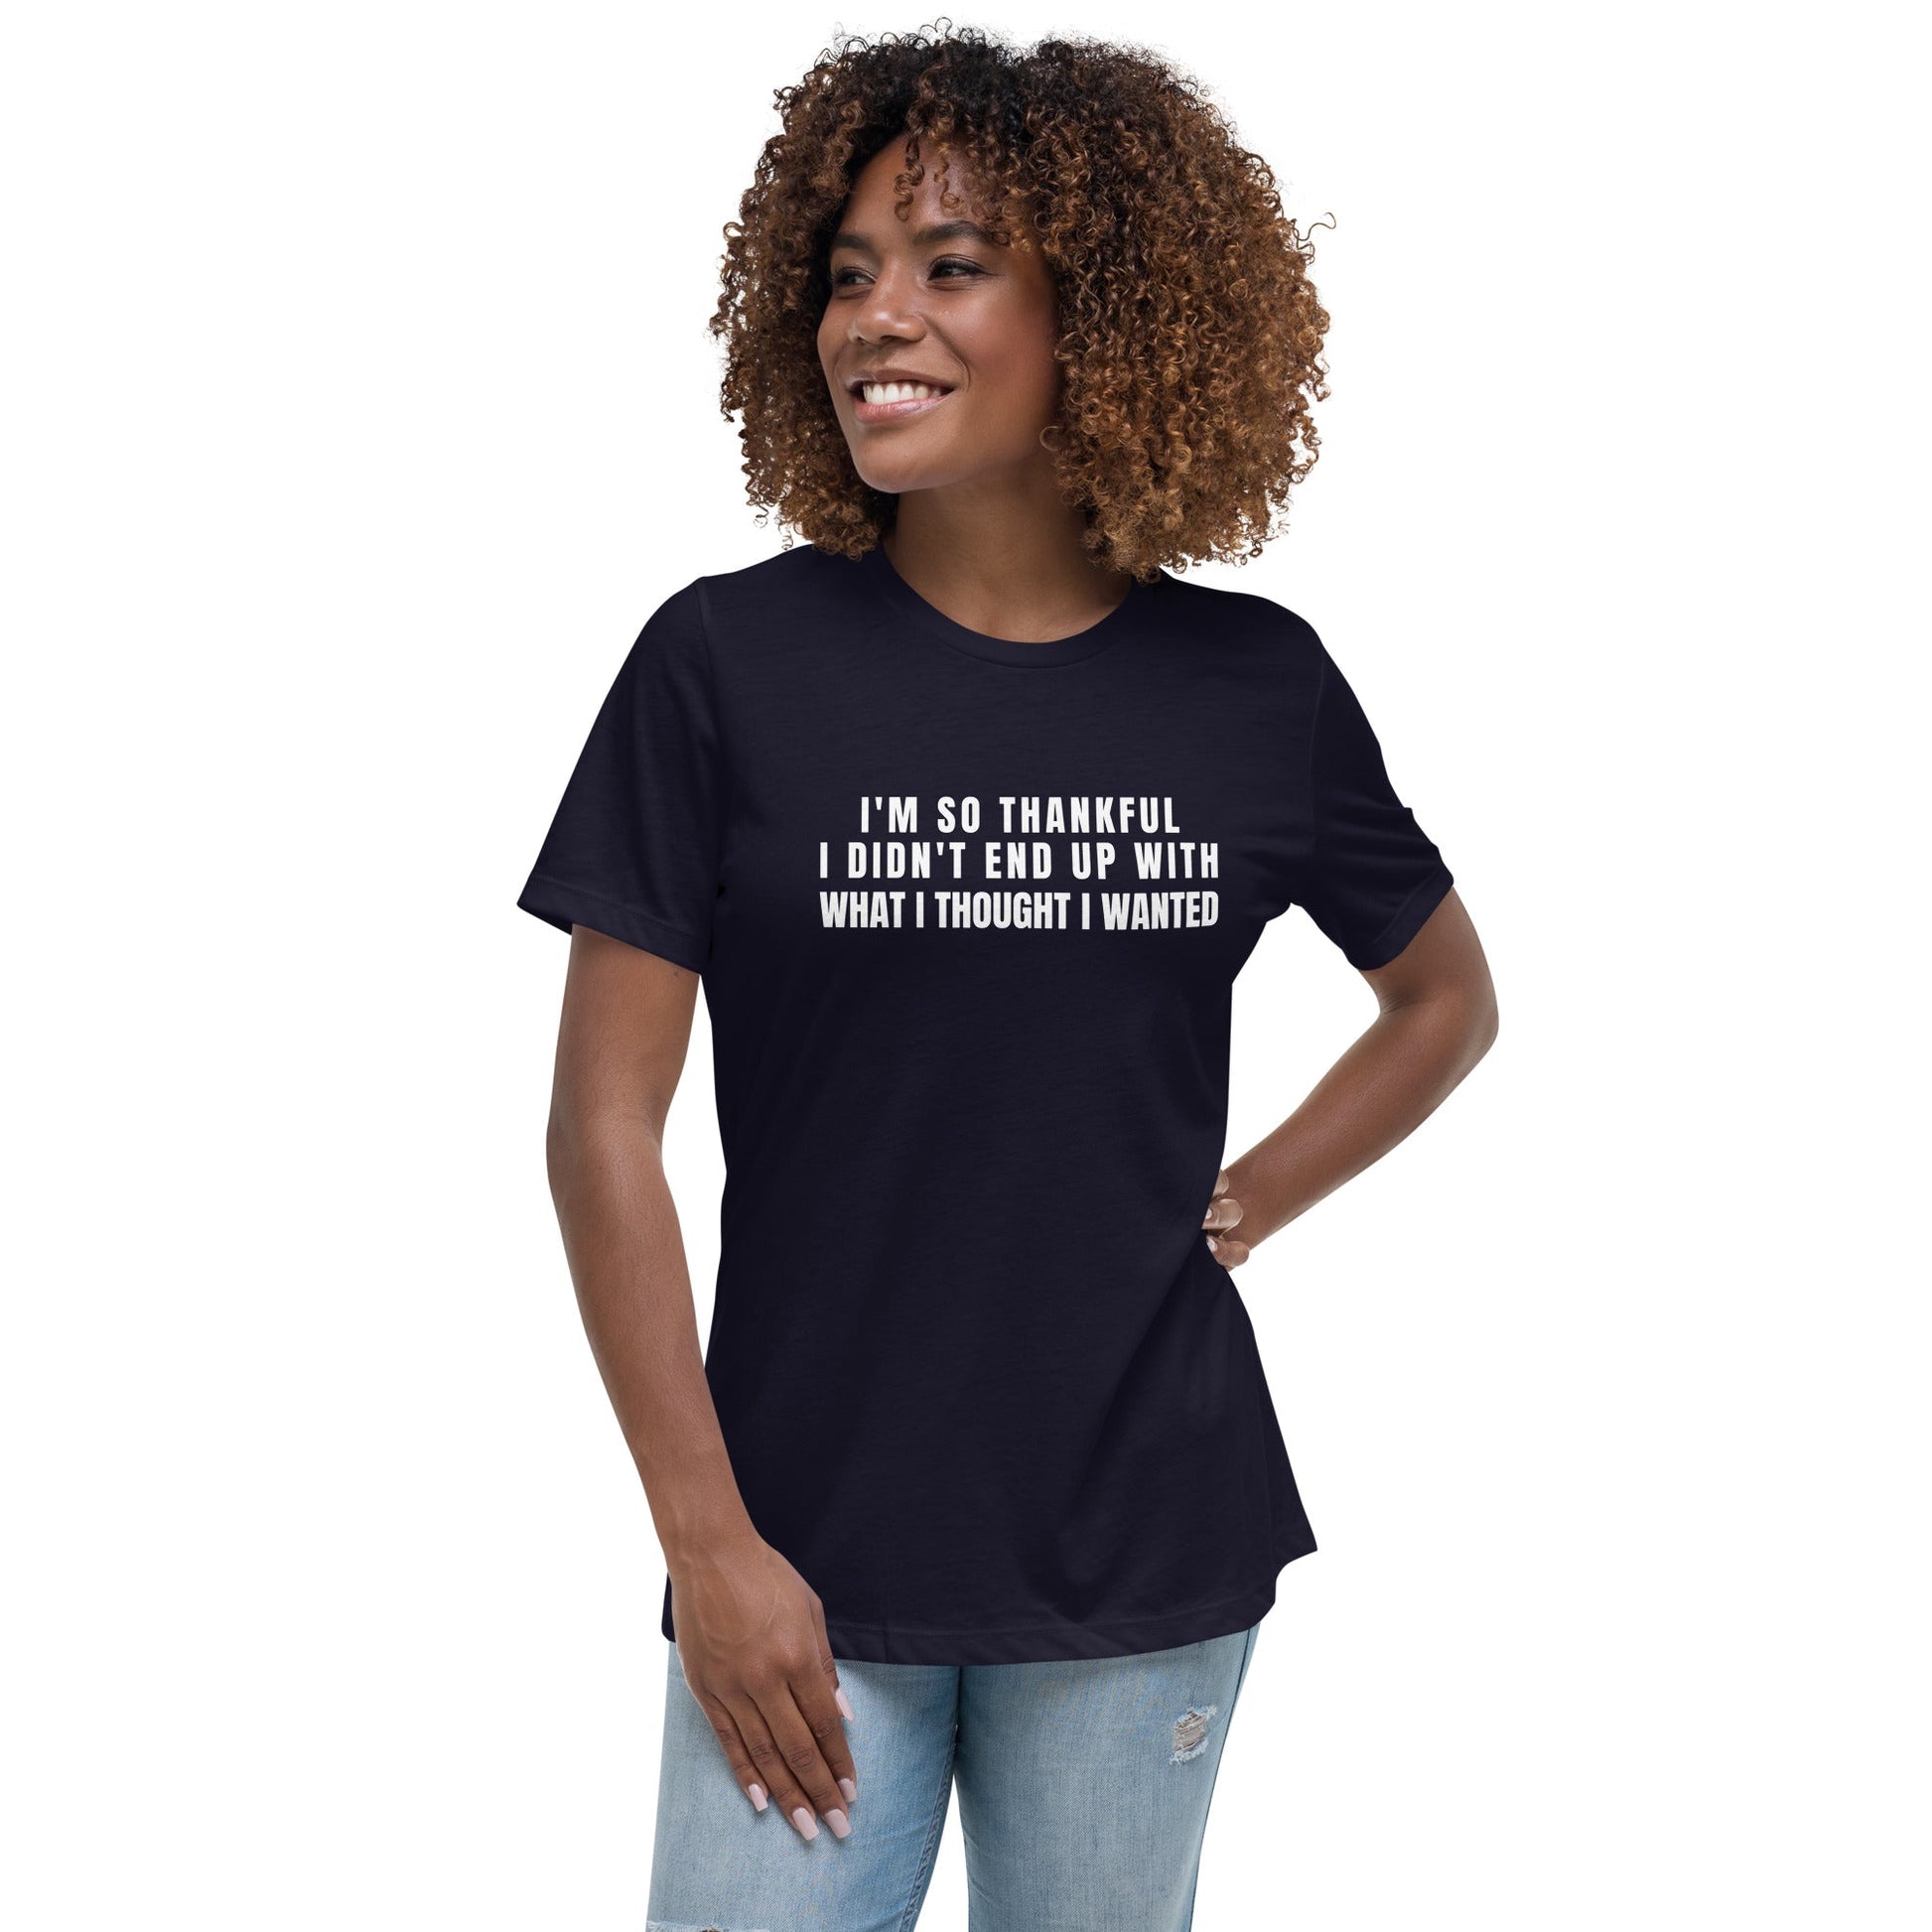 I'm So Thankful I Didn't End Up With What I Thought I Wanted Women's Relaxed T-Shirt - Catch This Tea Shirts